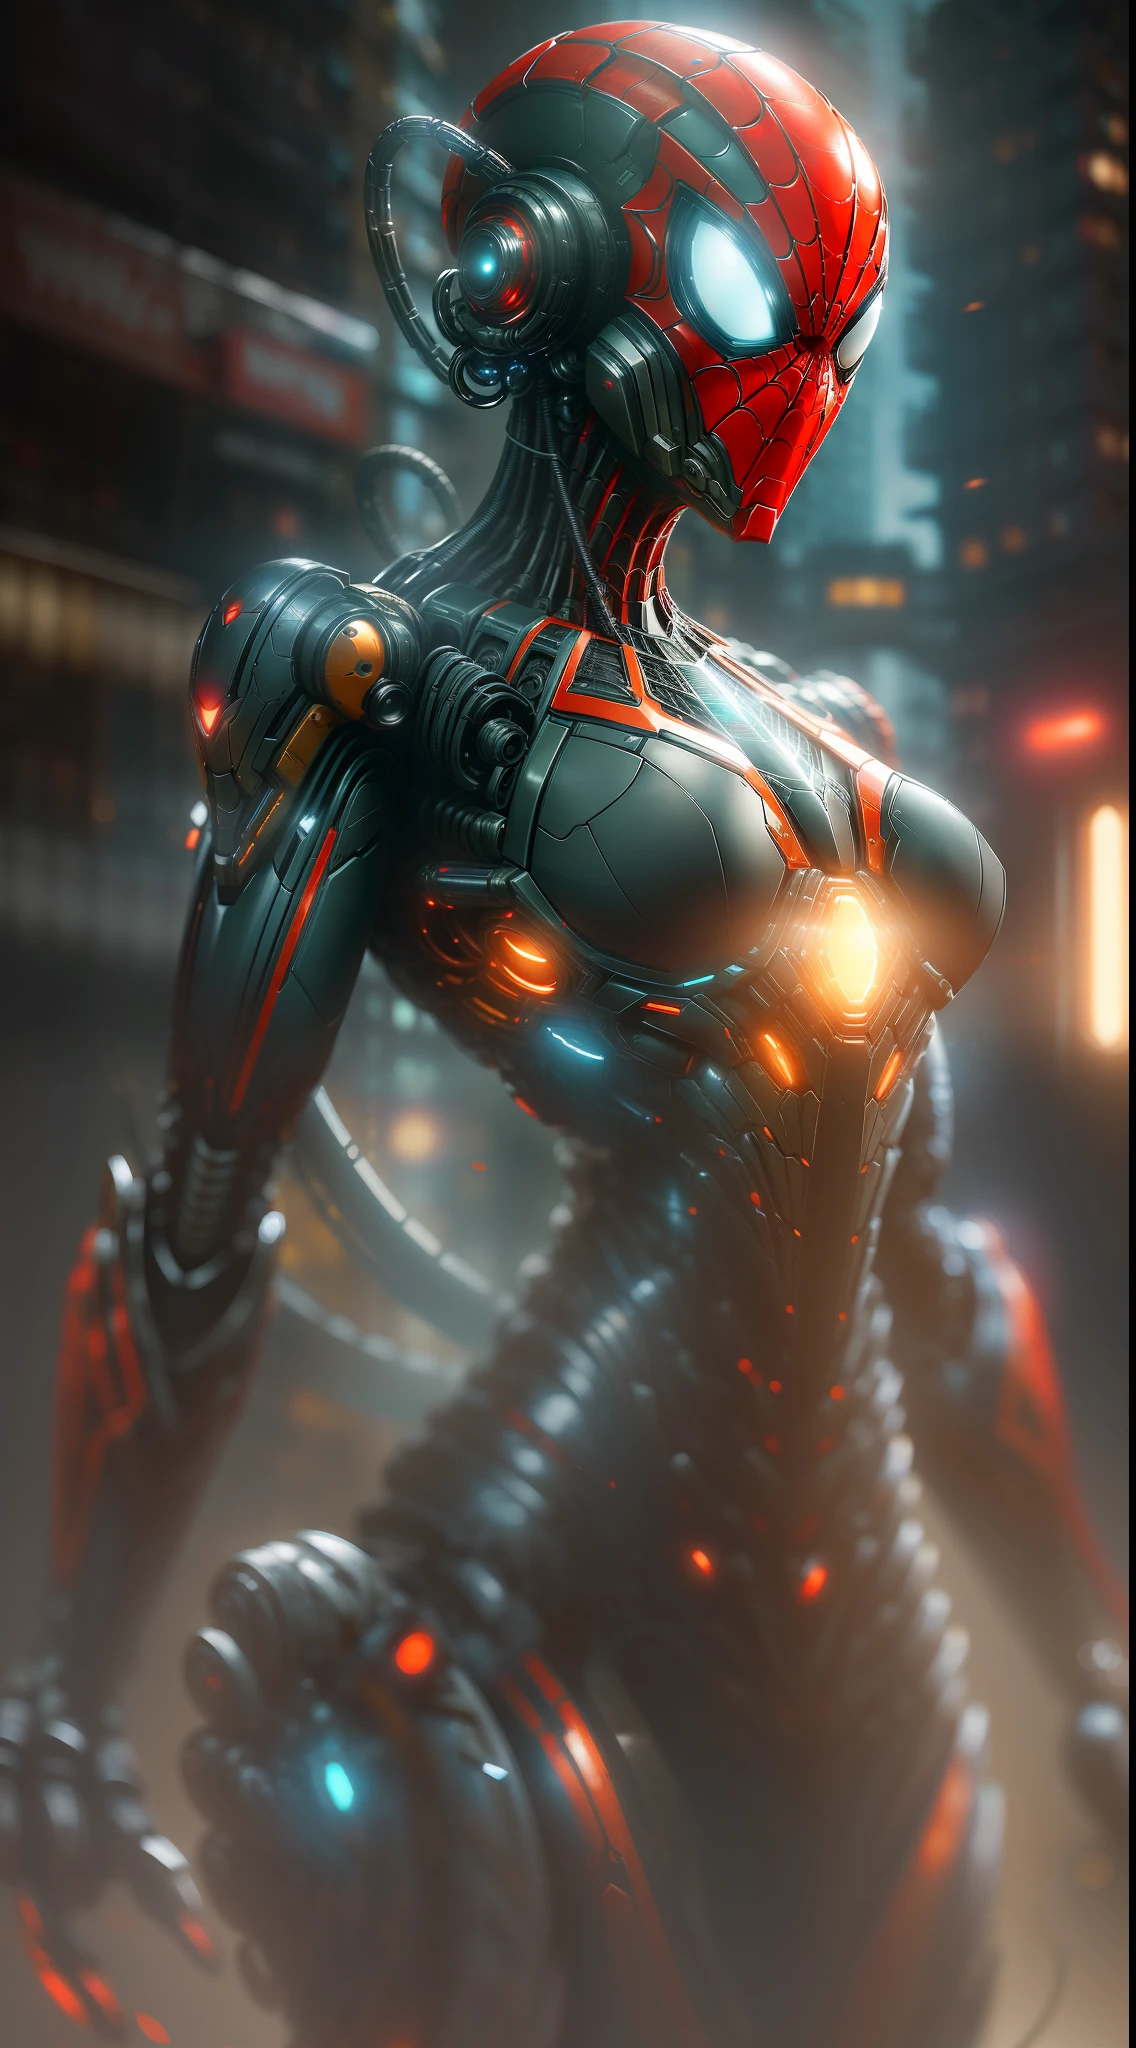 Spider-Biodroid from Marvel photography, biomechanical, complex robot, full growth, hyper-realistic, insane small details, extremely clean lines, cyberpunk aesthetic, a masterpiece presented at Zbrush Central